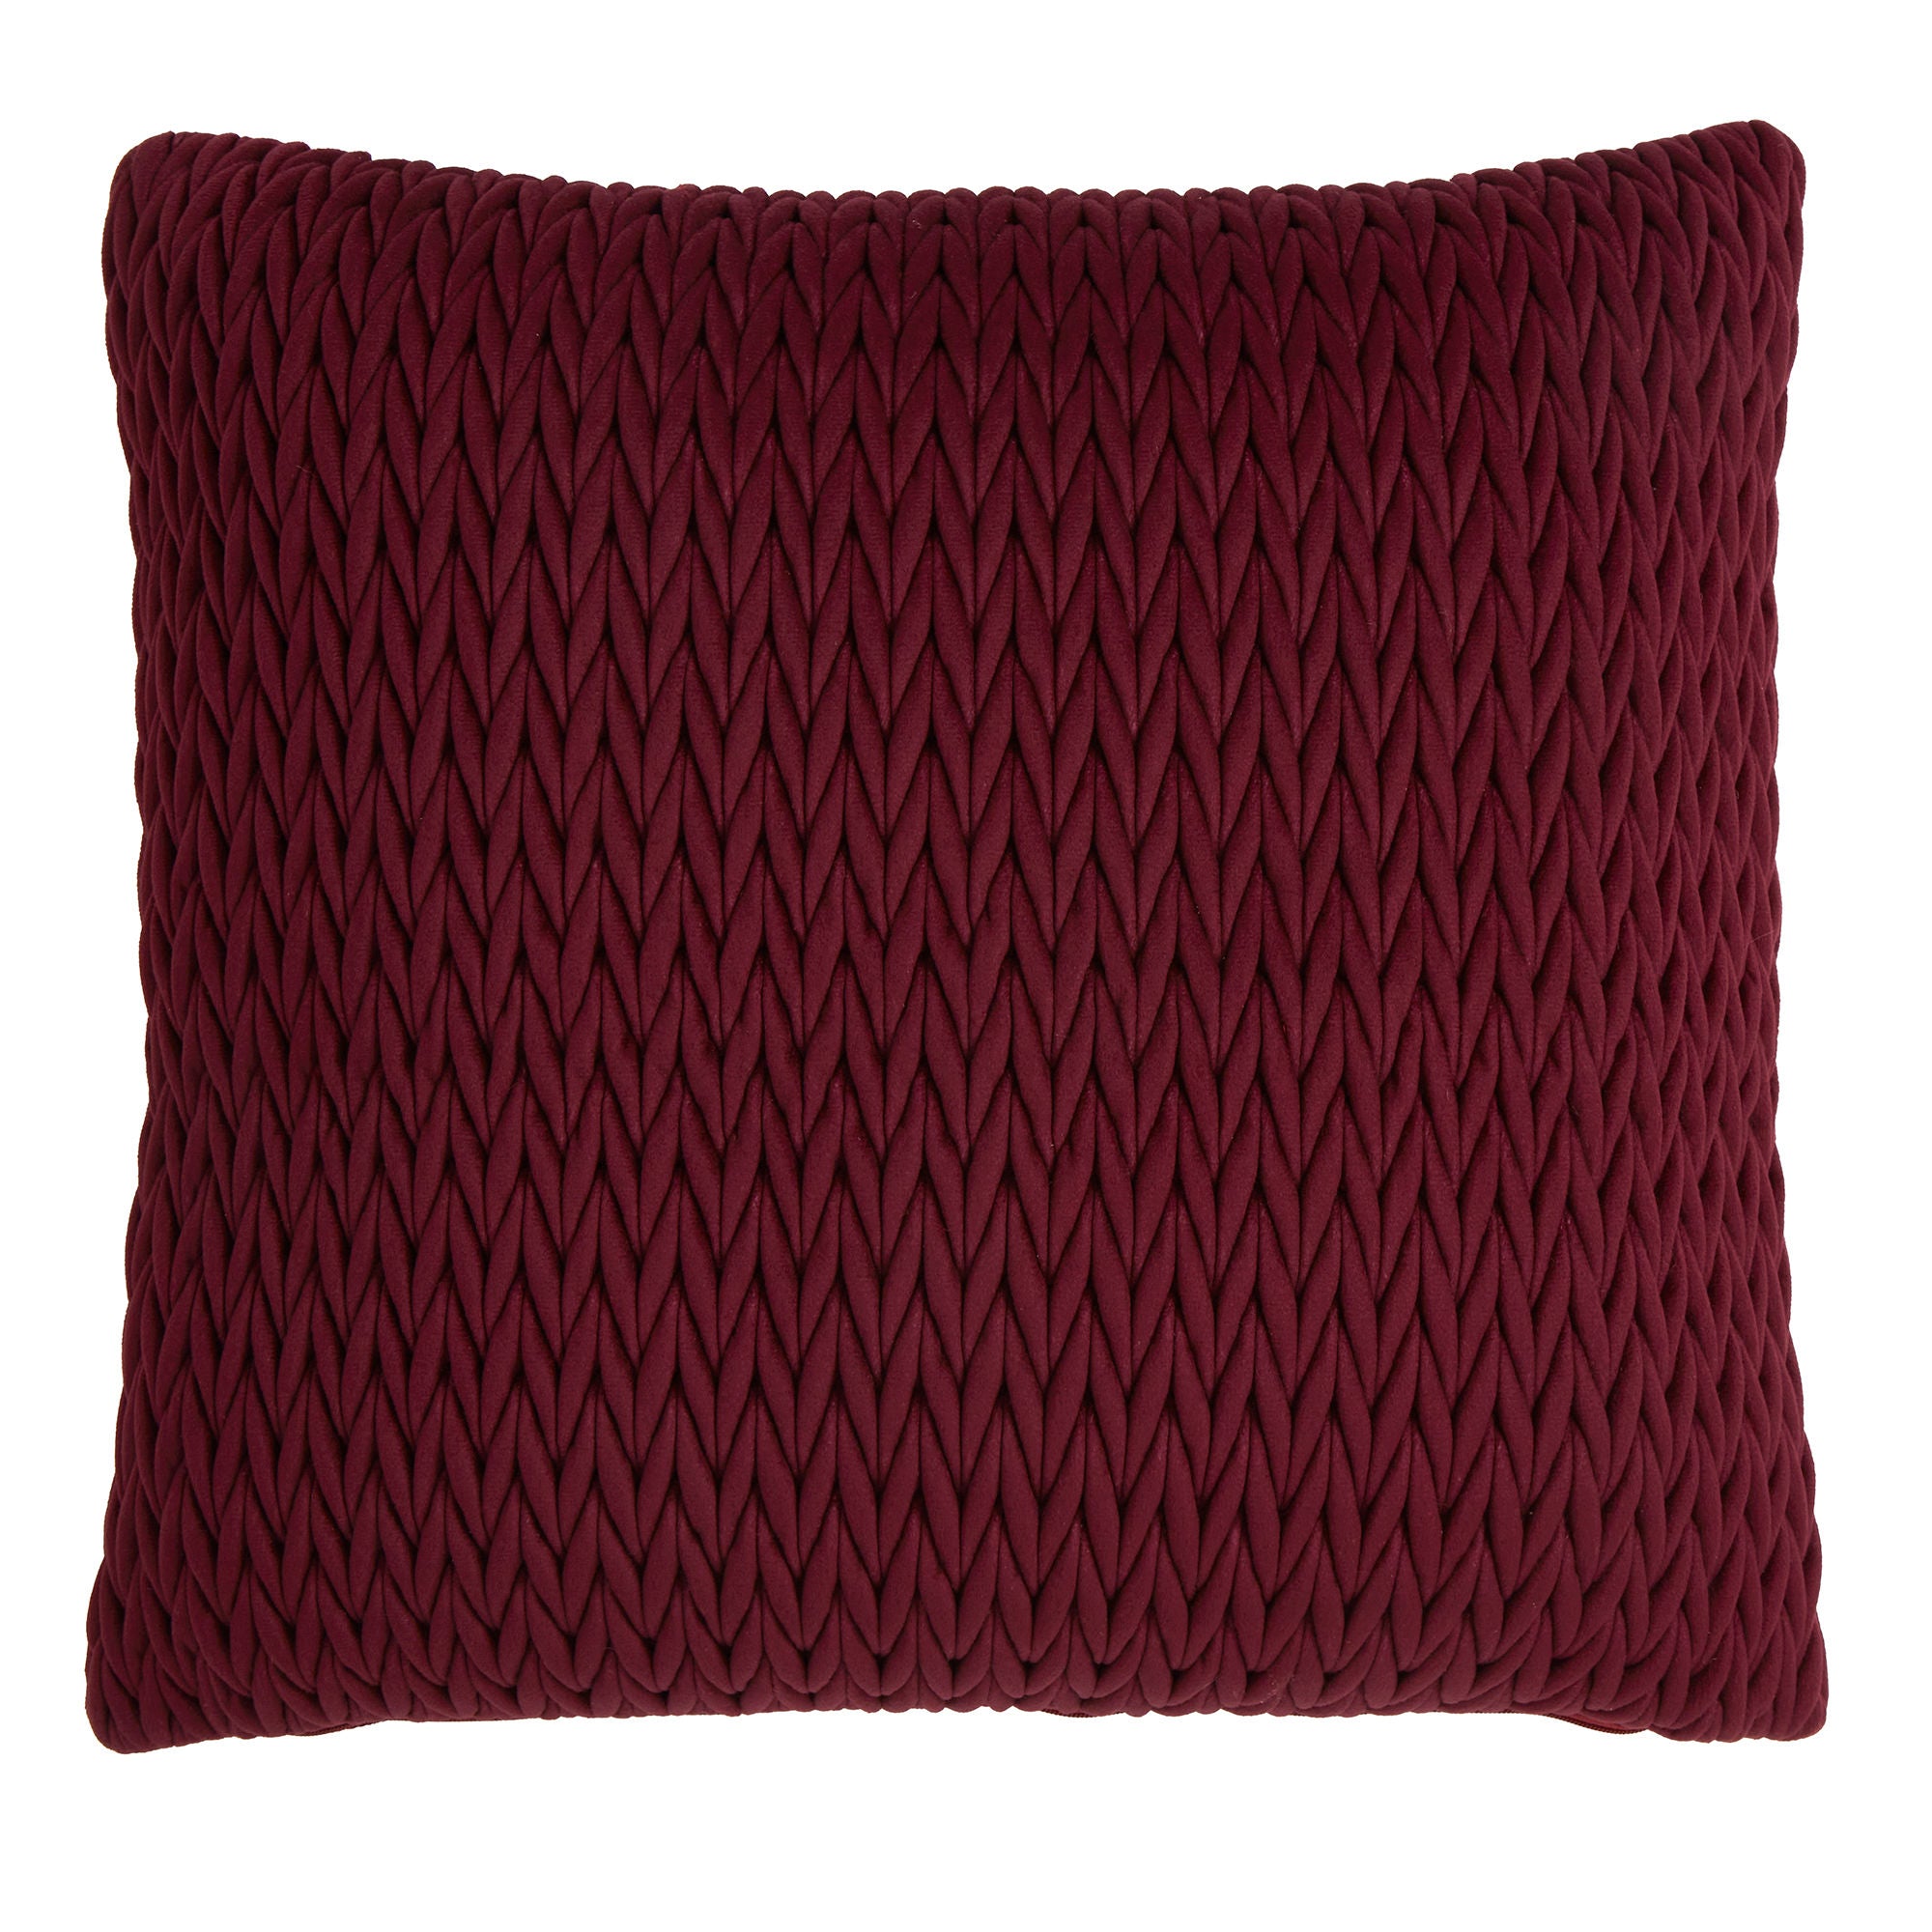 Amory Cushion by Laurence Llewelyn-Bowen in Wine 43 x 43cm - Cushion - Laurence Llewelyn-Bowen